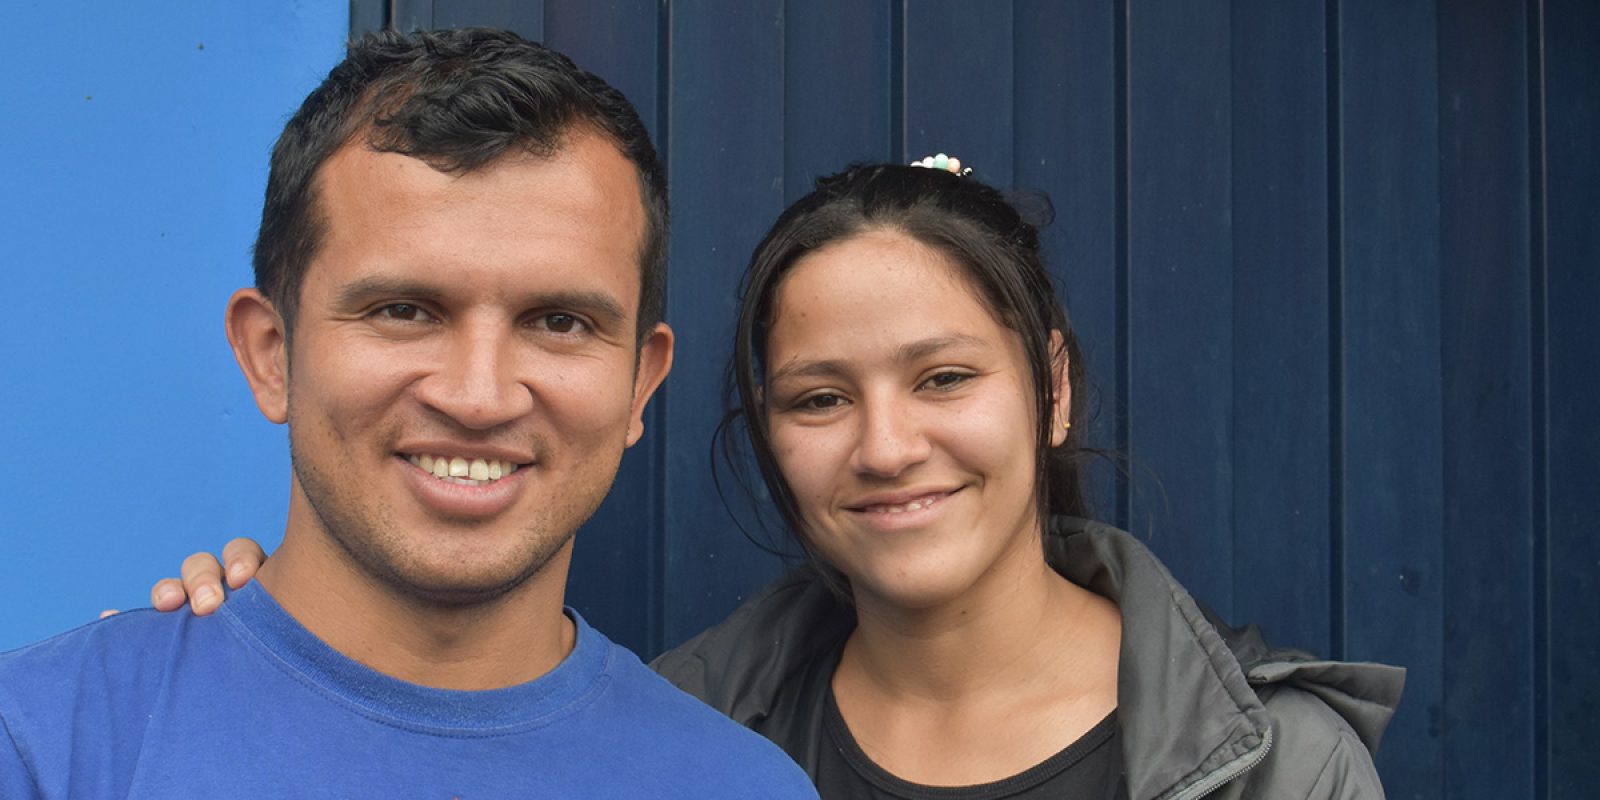 Yorbelys and Rafael found a community with the other families in the JRS-funded shelter in Quito, Ecuador.